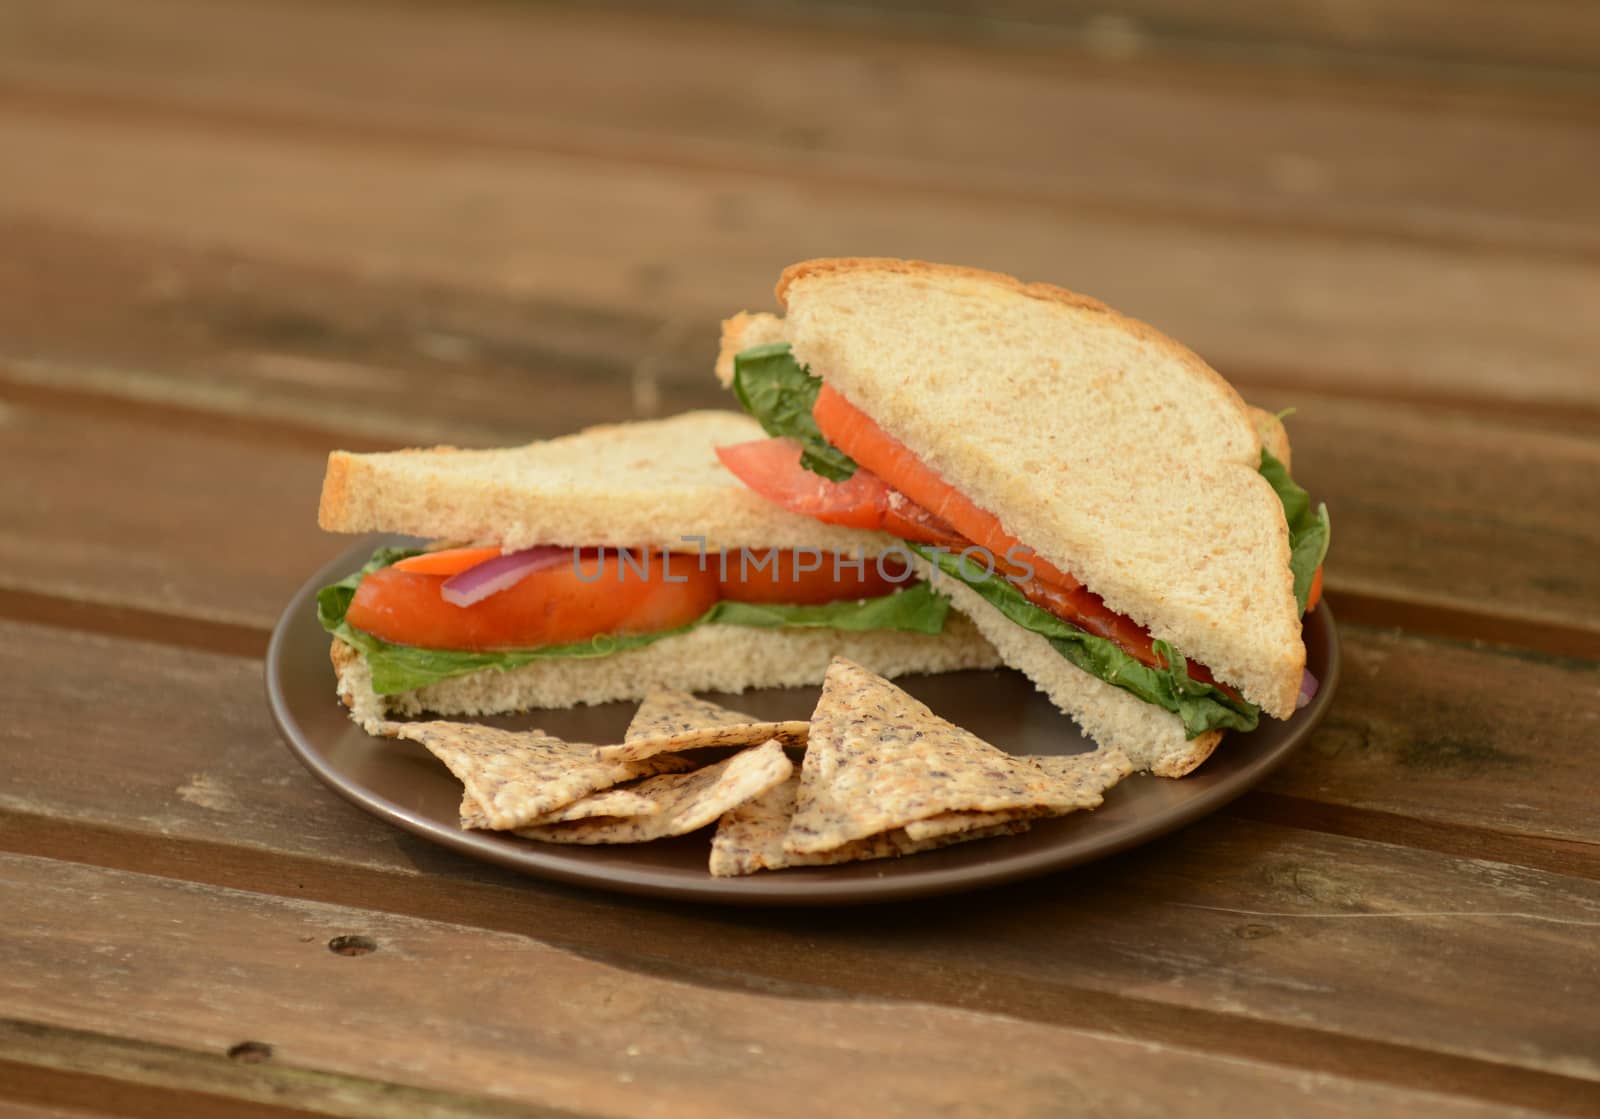 vegetable sandwich and tortilla chips by ftlaudgirl